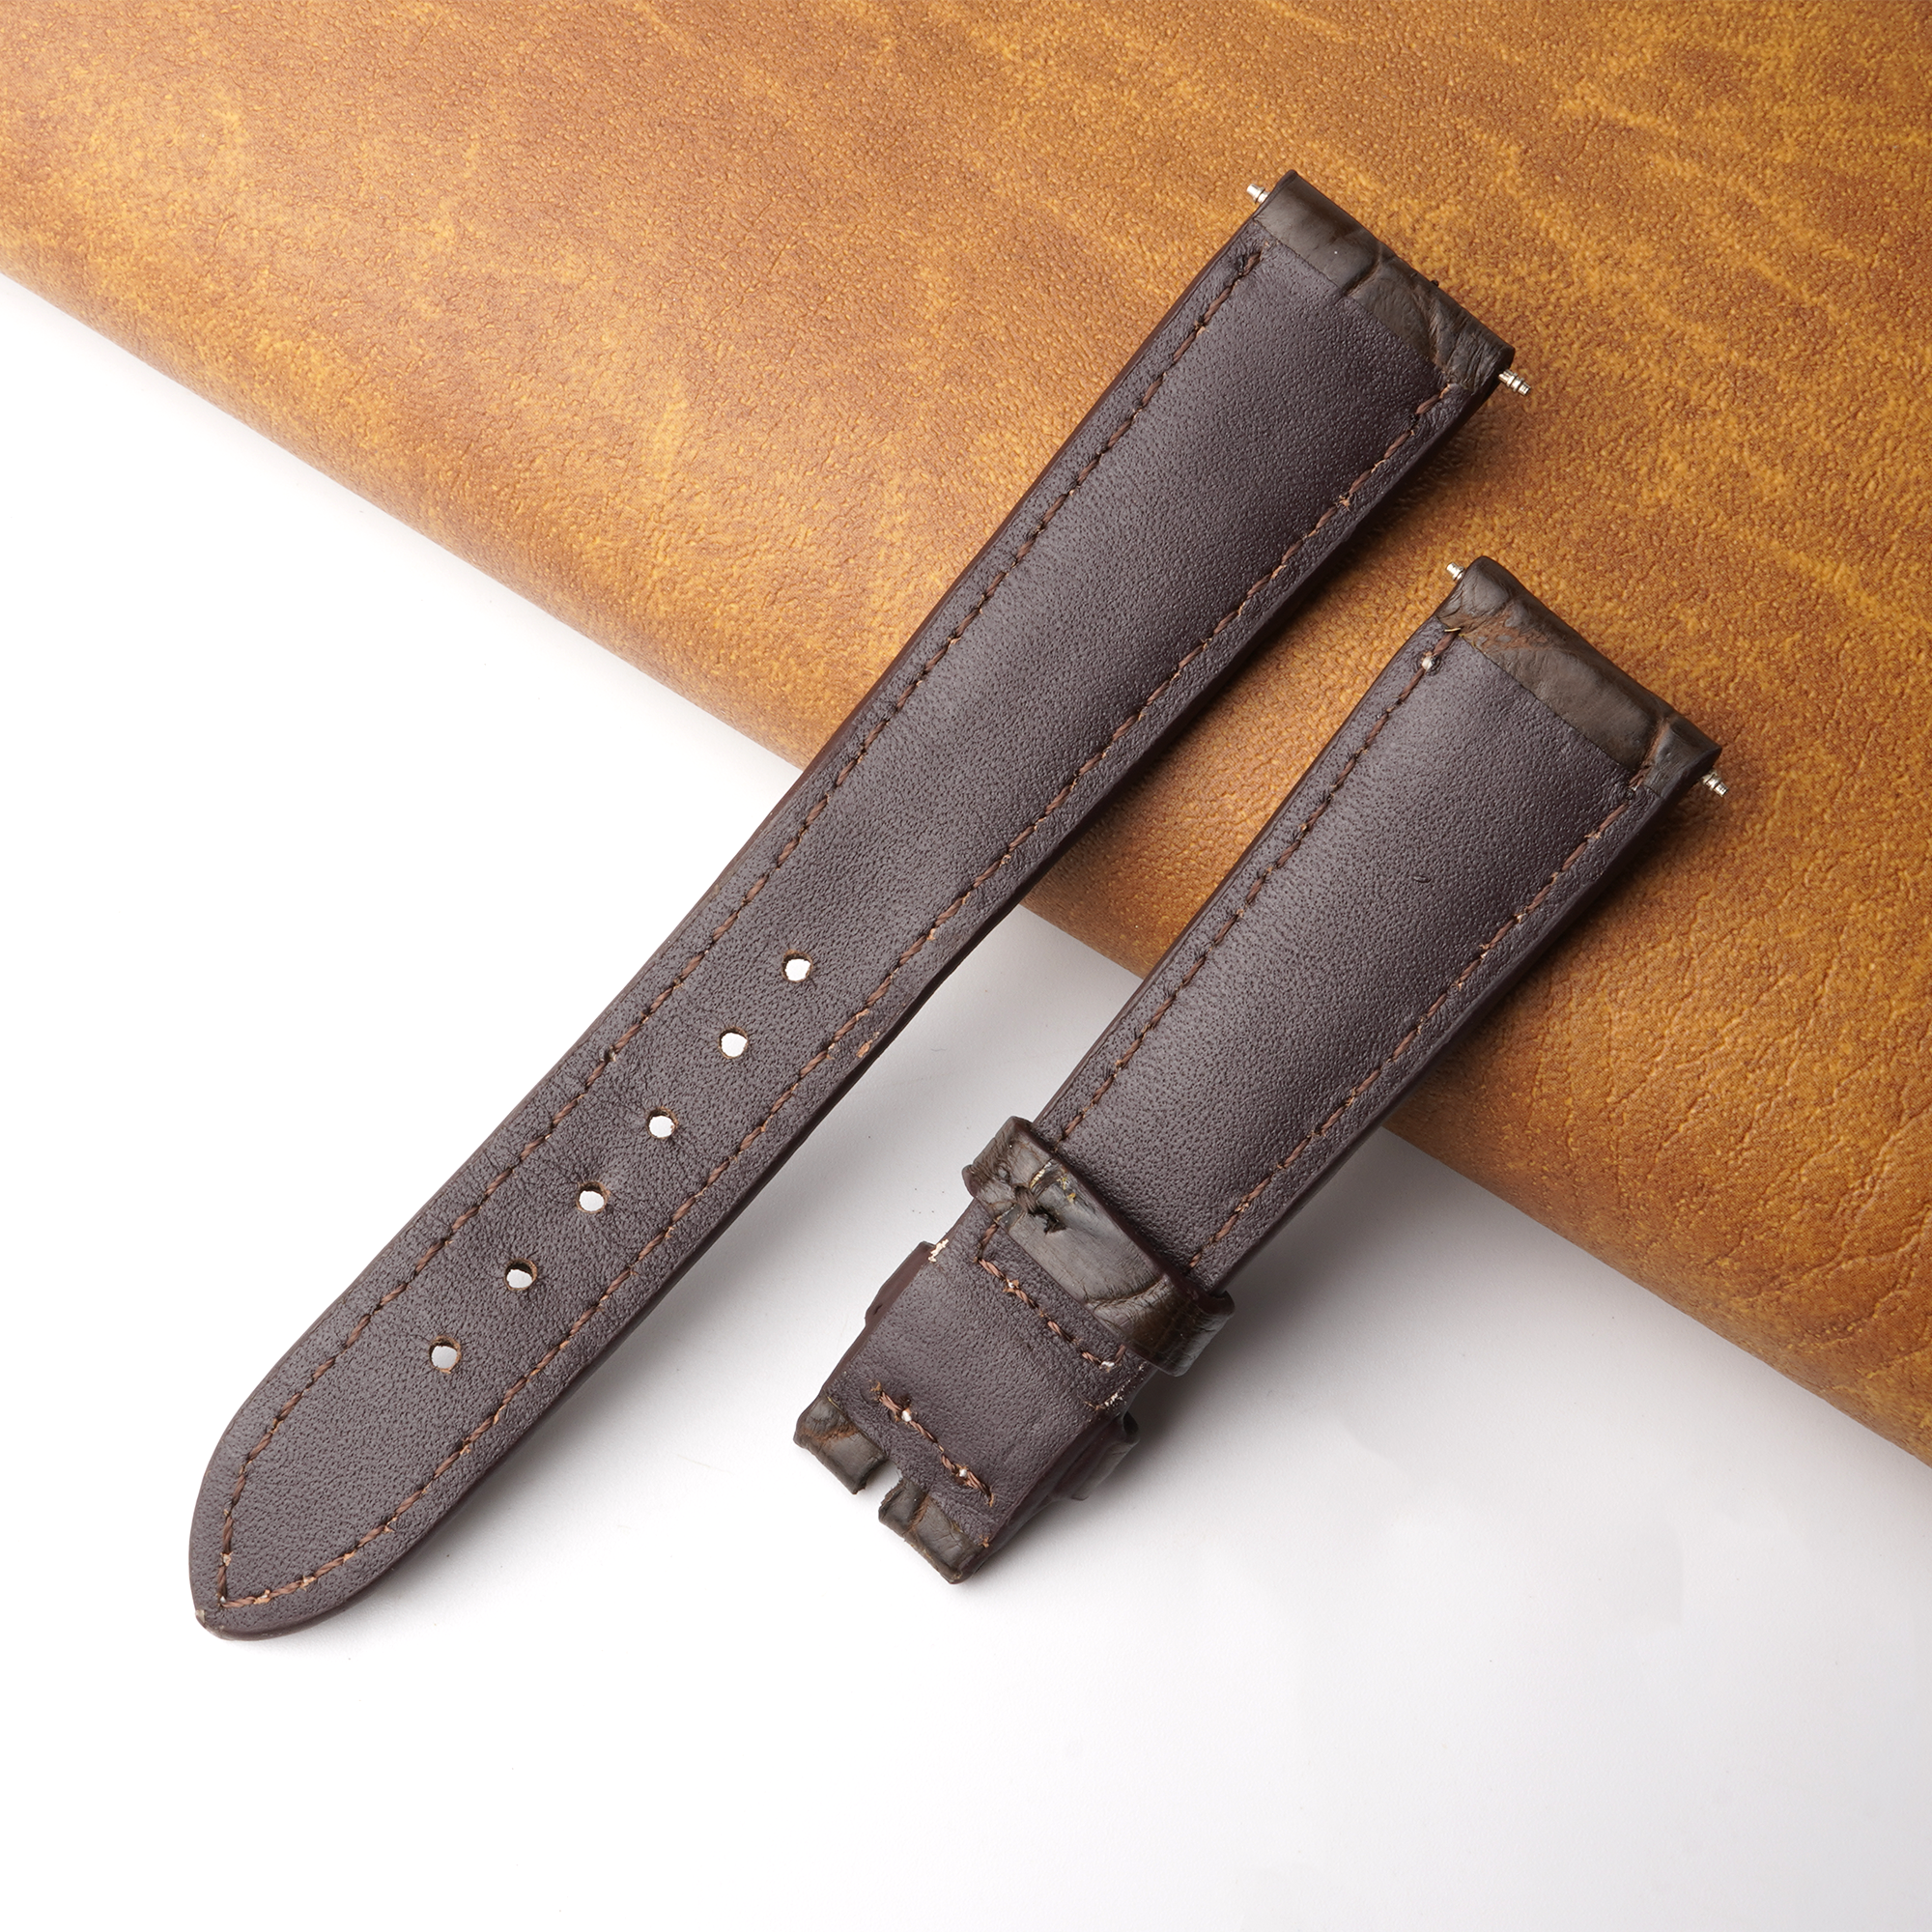 20mm Dark Brown Unique Alligator Leather Watch Band For Men | DH-77D